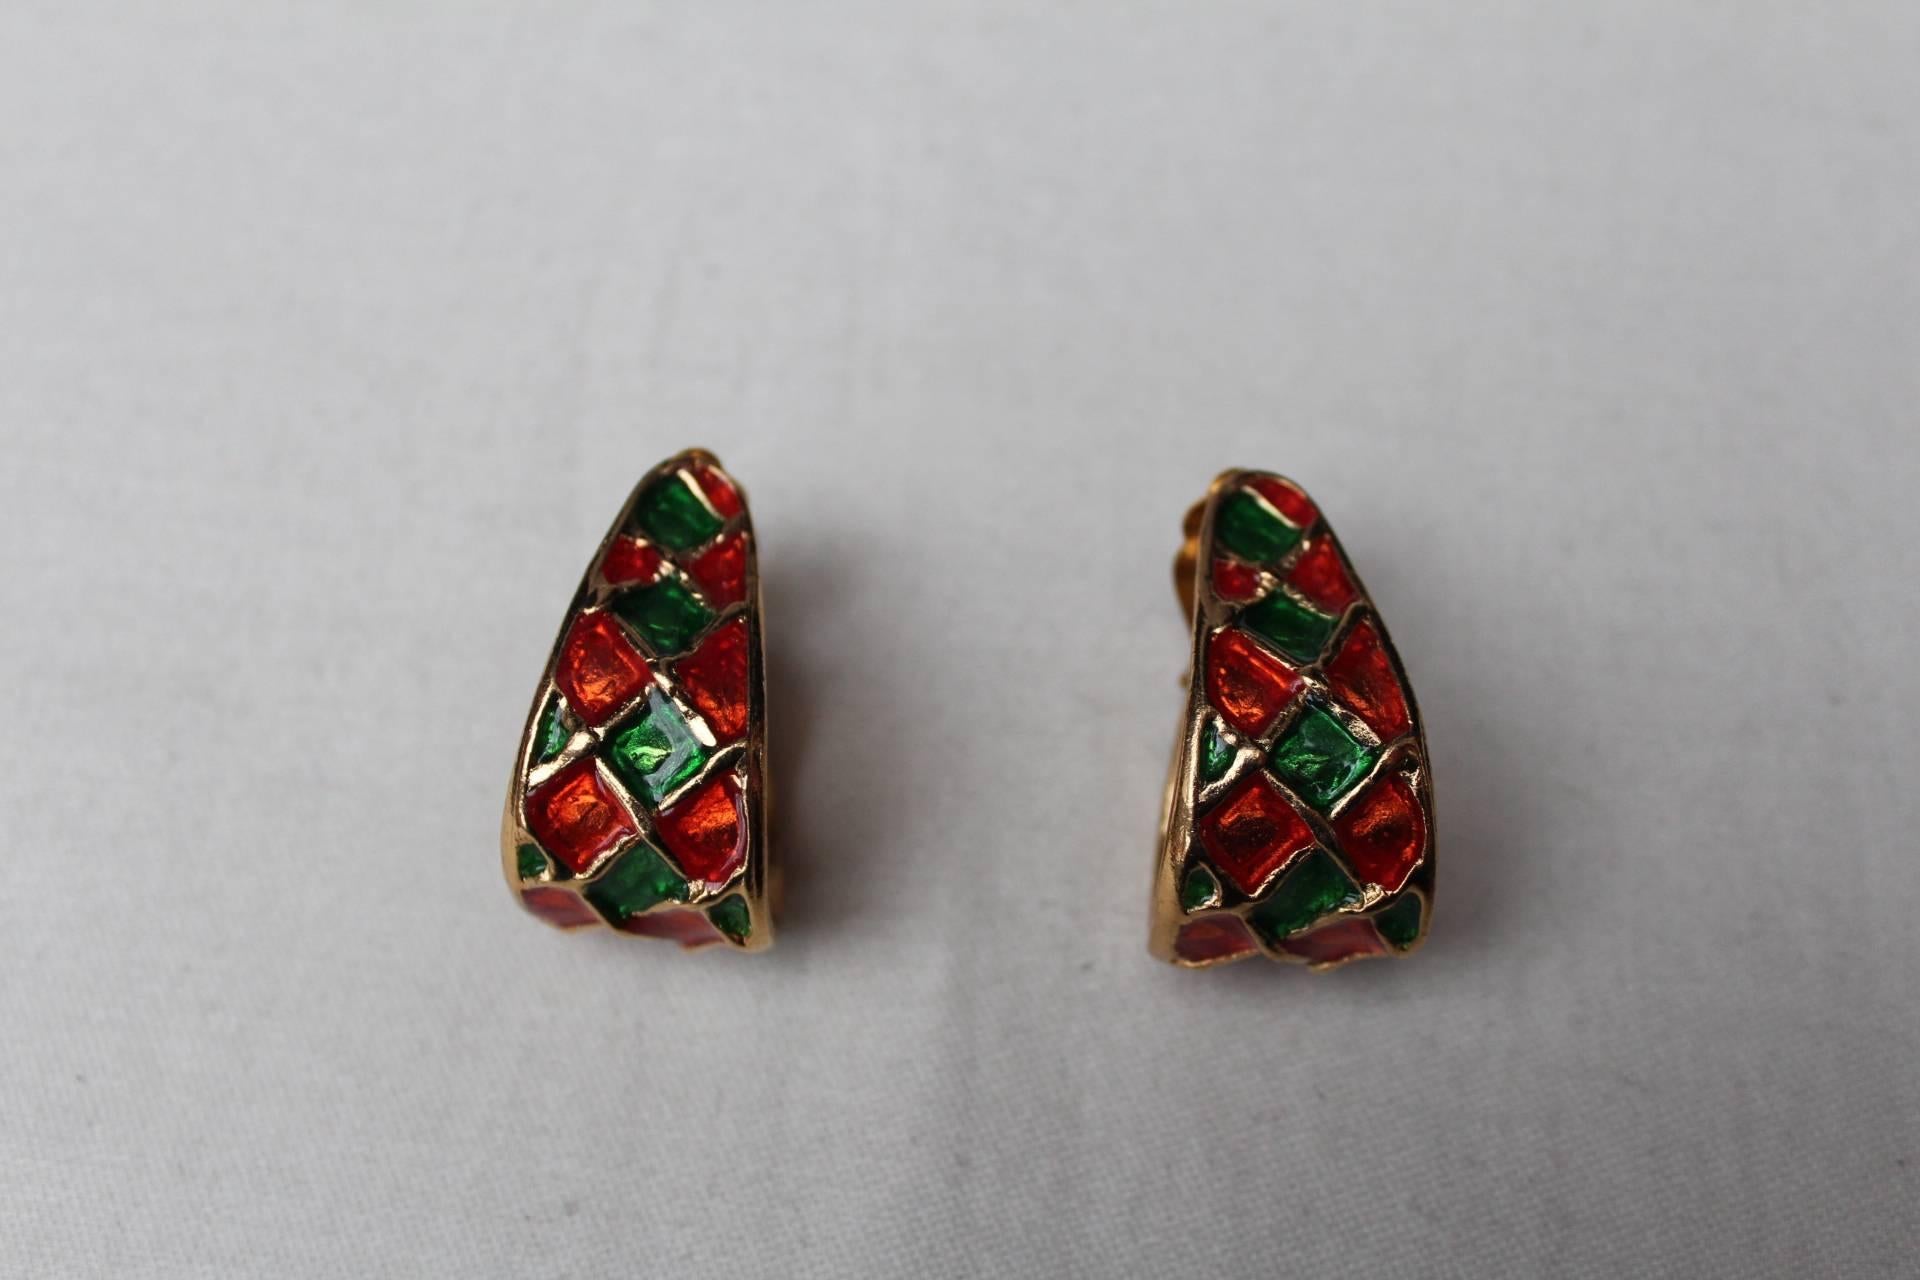 YVES SAINT LAURENT (Made in France) Pair of half hoop earrings, chiseled gilded metal and green and orange enamel with criss-cross diamond shape pattern. Circa 1980.

Height 4 cm (1.25 in); width .5 to 2 cm (.10 to 1.75 in).

Very good condition